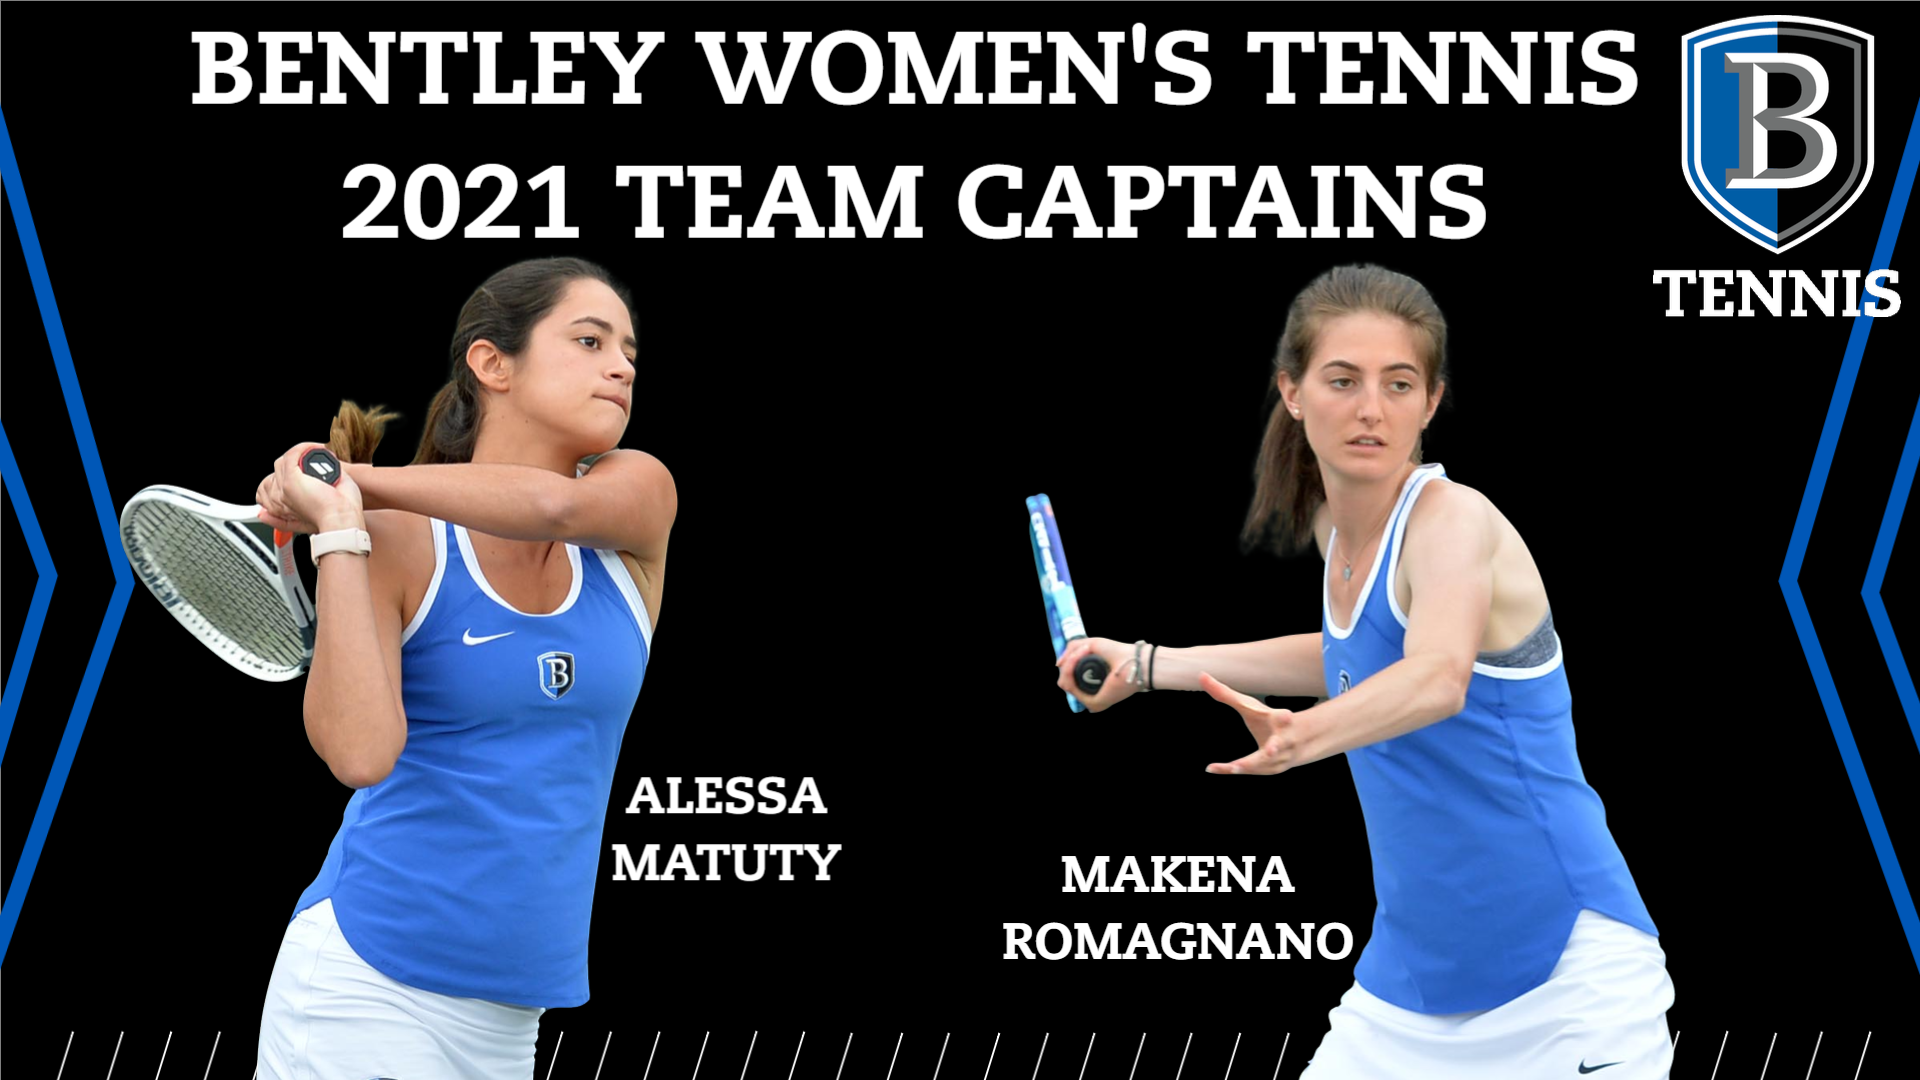 Matuty and Romagnano Named Captains of the Bentley Women’s Tennis Team